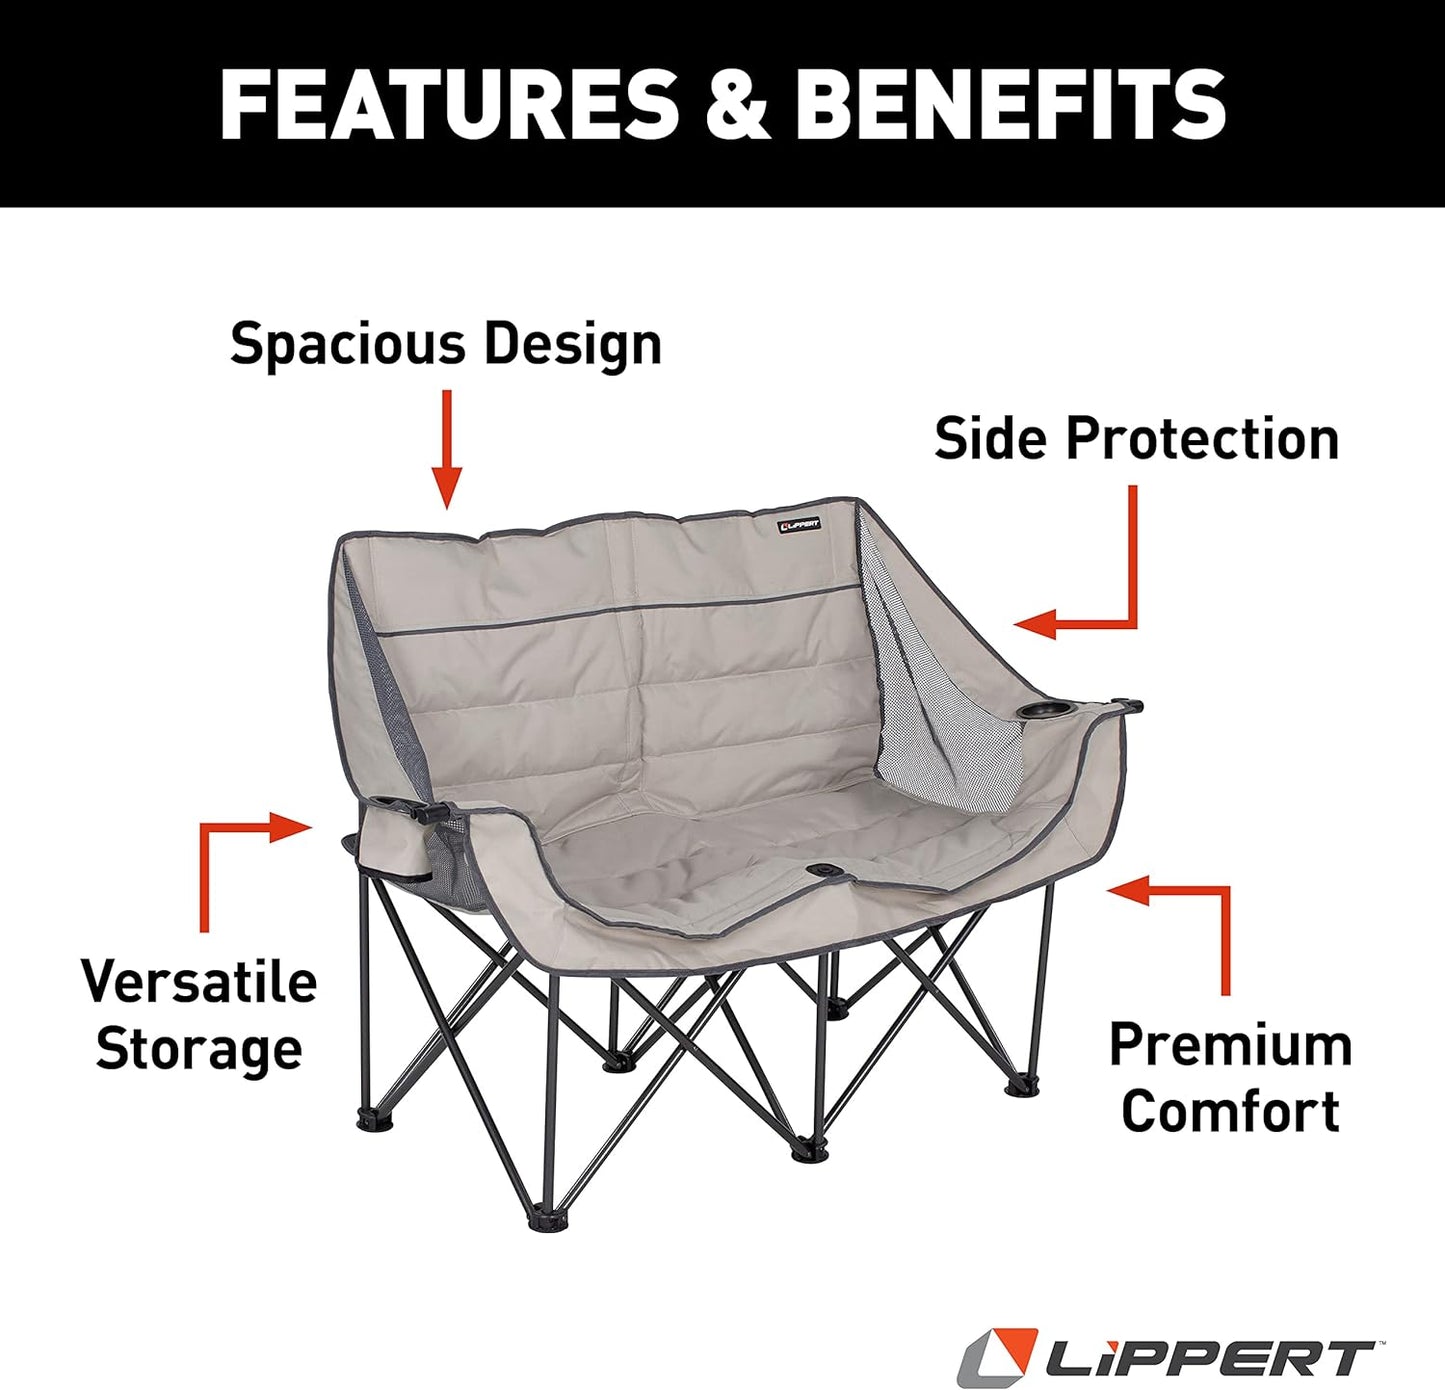 Lippert Campfire Folding Loveseat with 500-lb. Weight Capacity, Carry Bag, Durable Mesh Fabrics, High-Loft Cushioning, Storage Pocket, Dual Cupholders, Stemmed Wine Glass Holder (Sand) - 2021000205